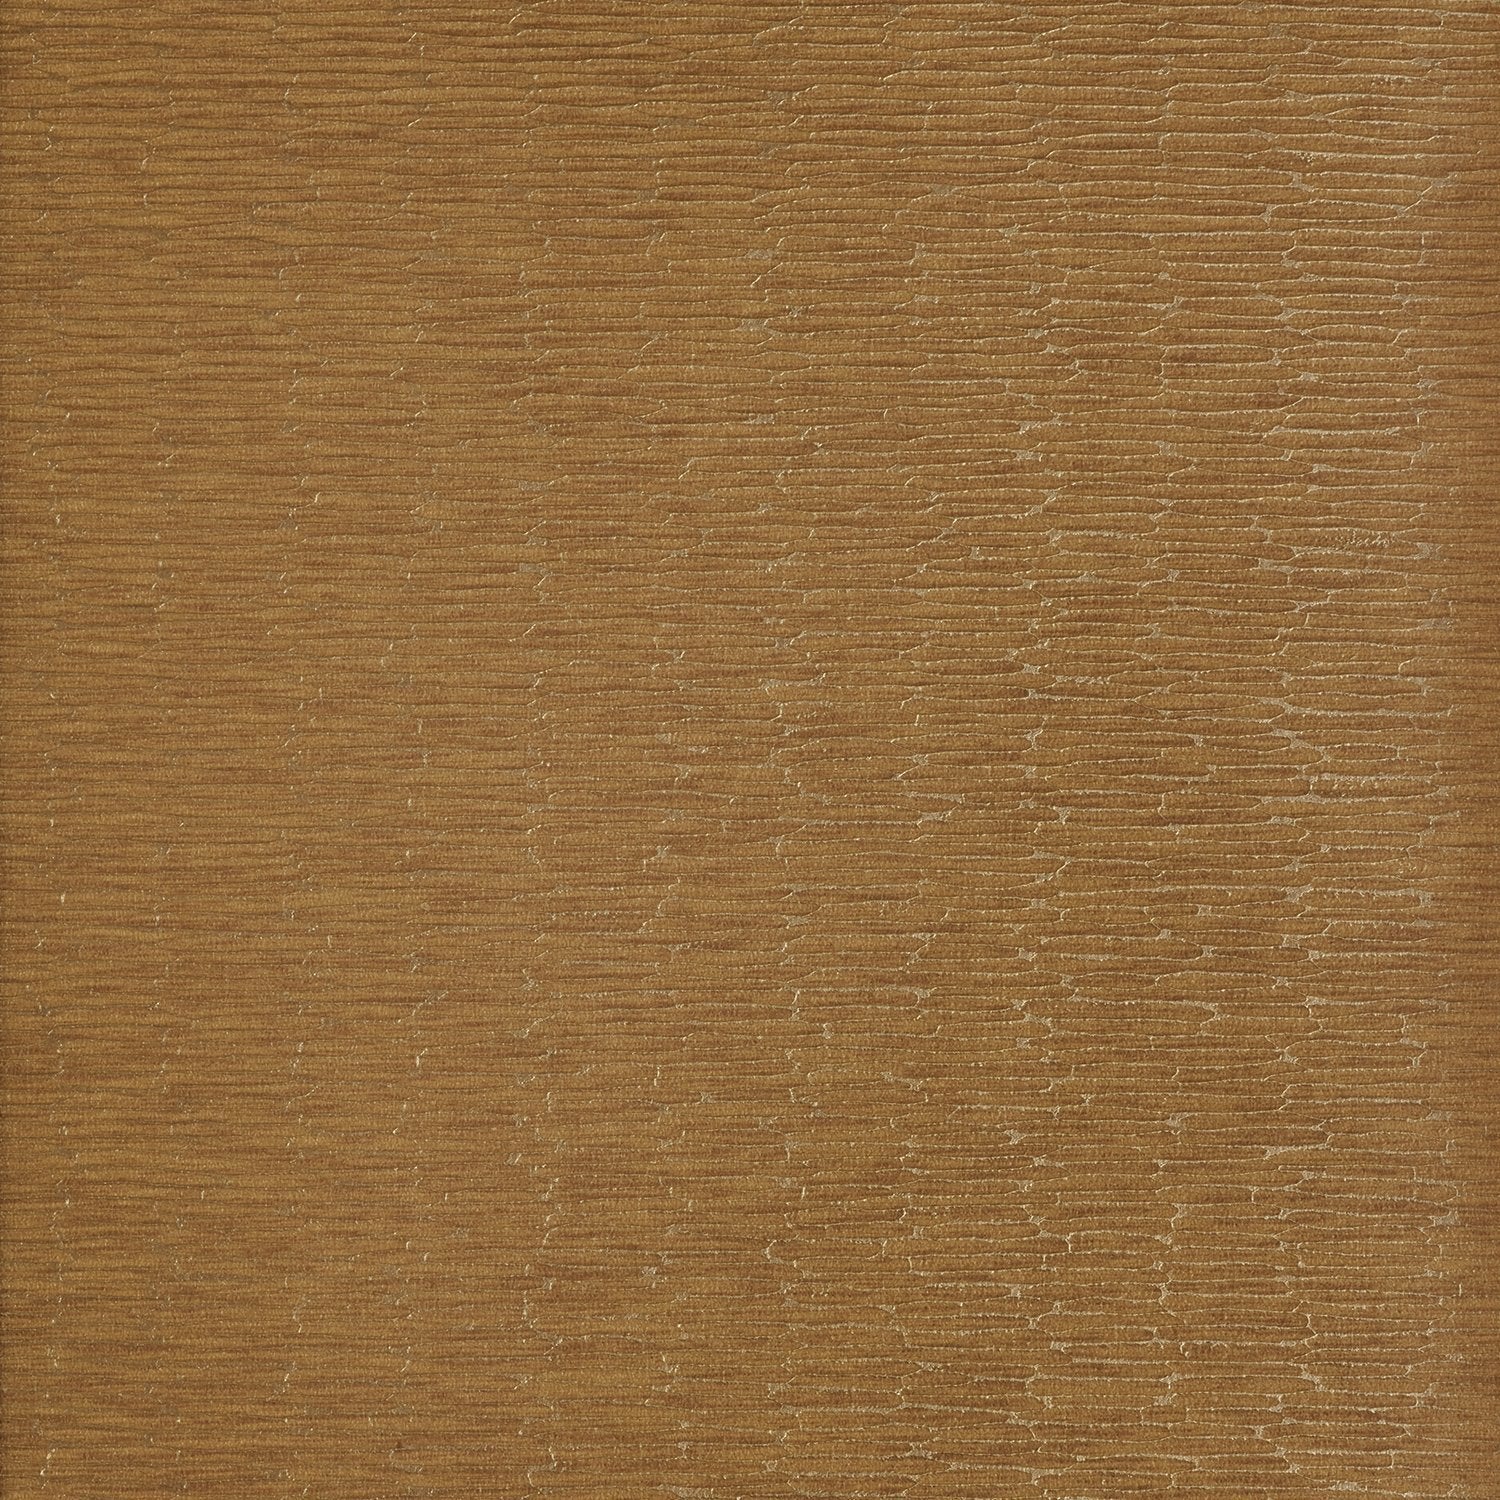 Chipper - Y46856 - Wallcovering - Vycon - Kube Contract